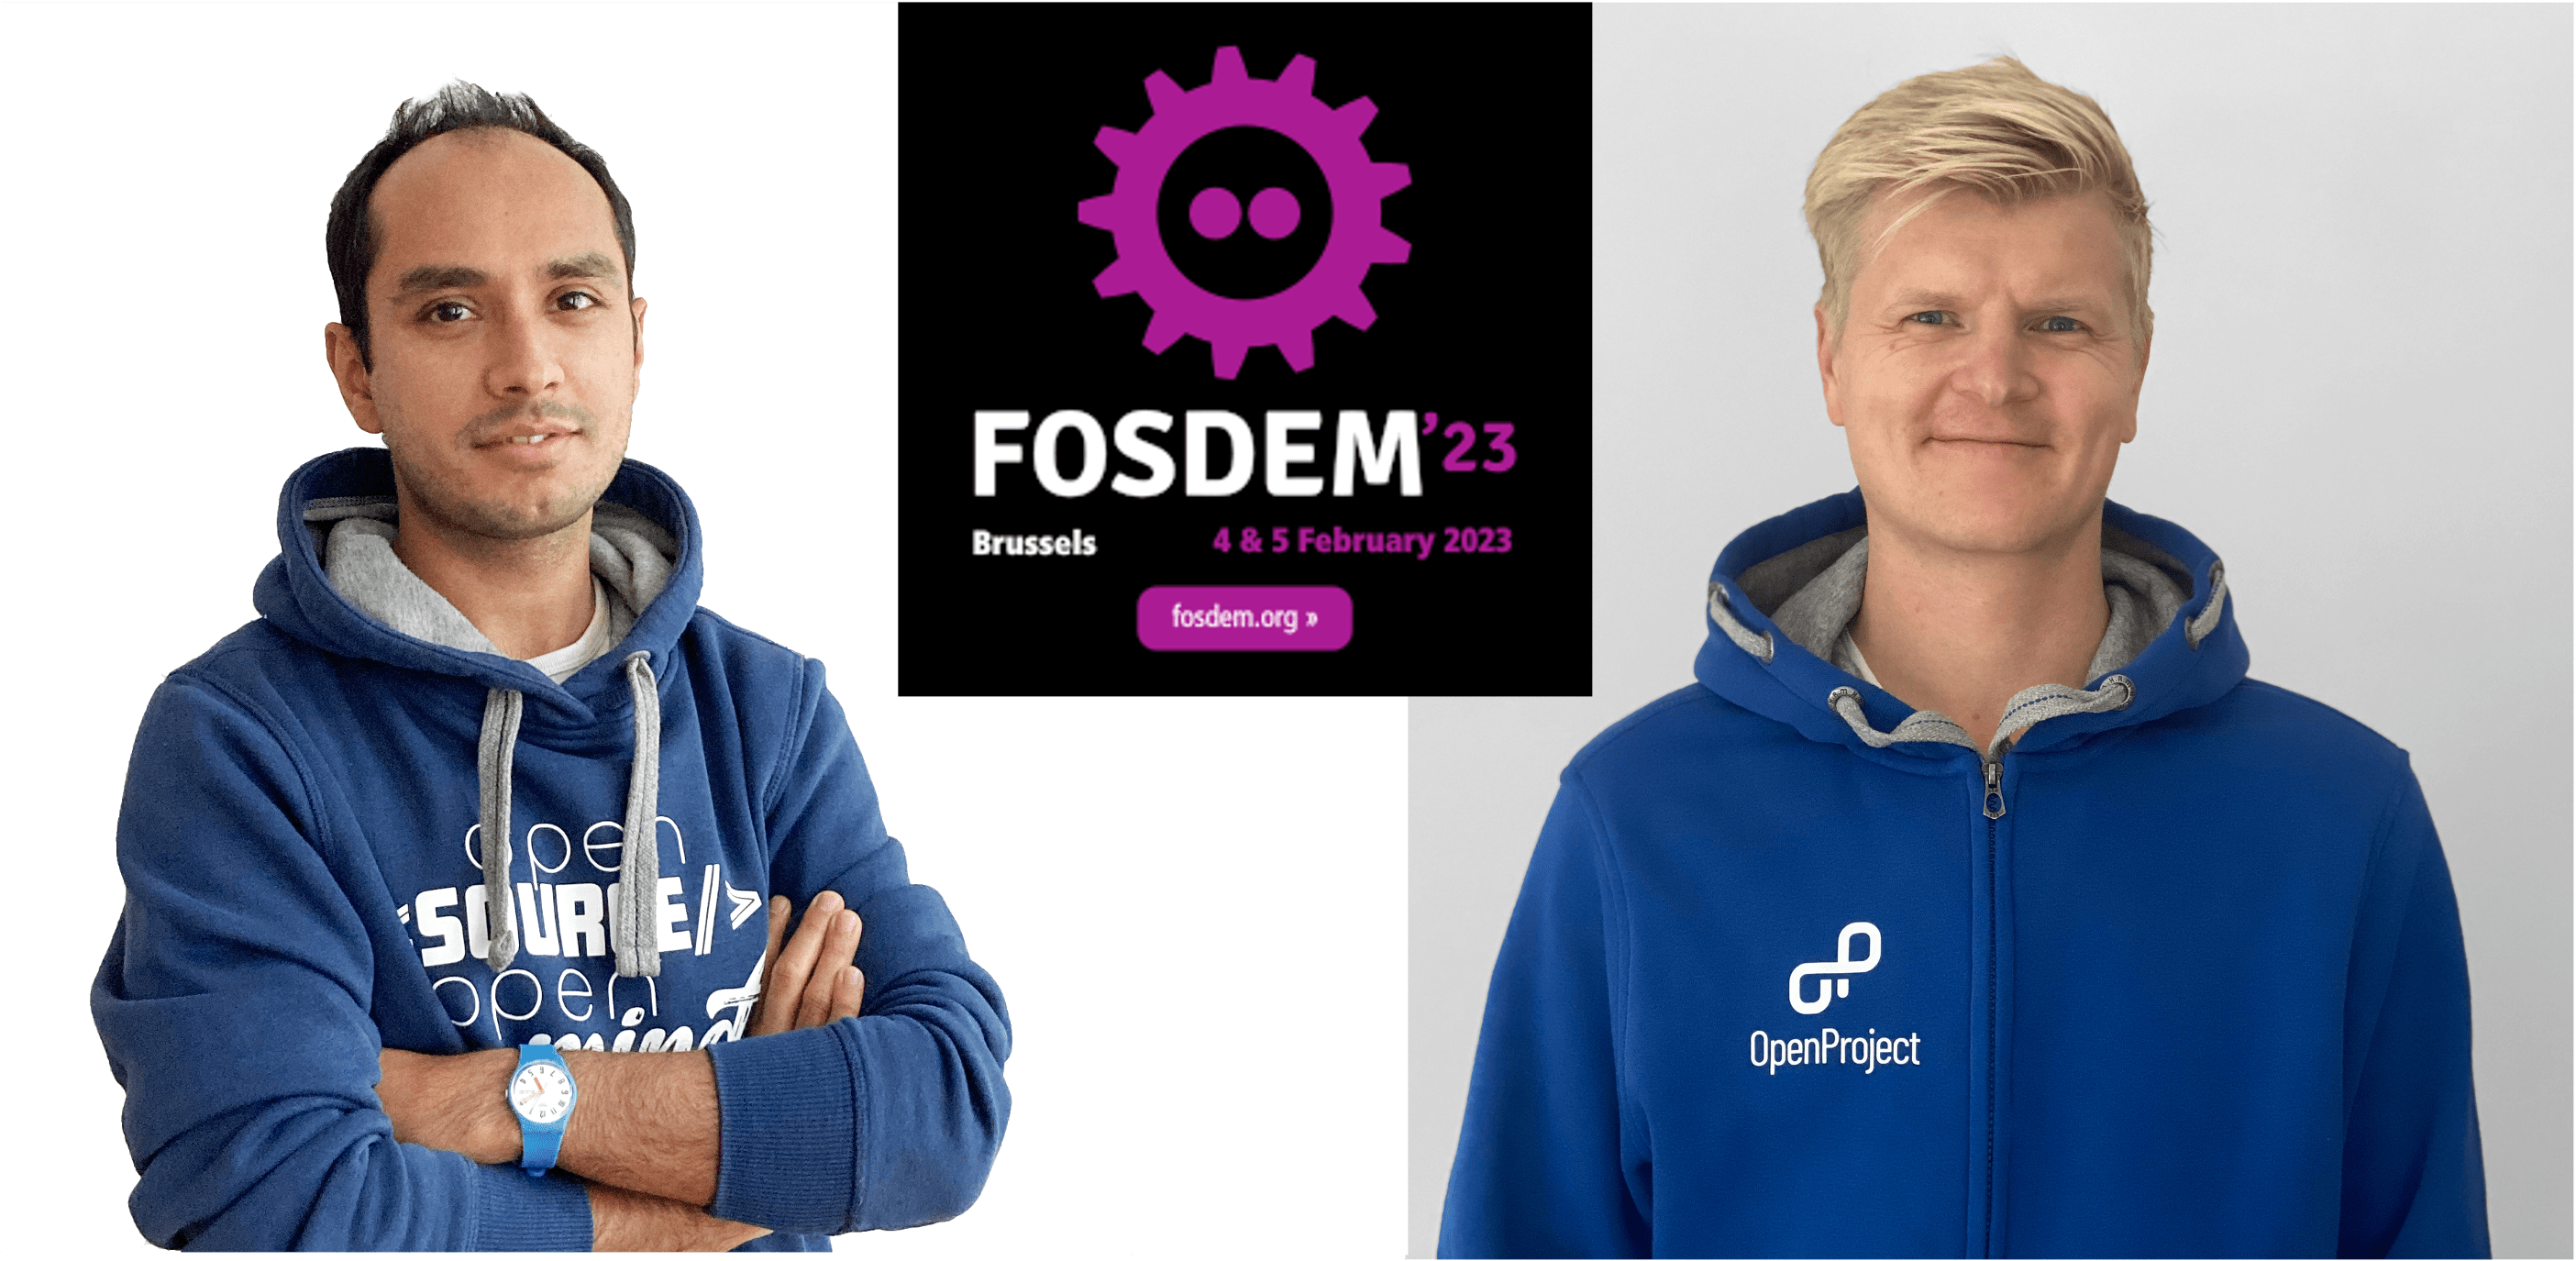 Pictures of Wieland and Parimal and the FOSDEM 2023 logo